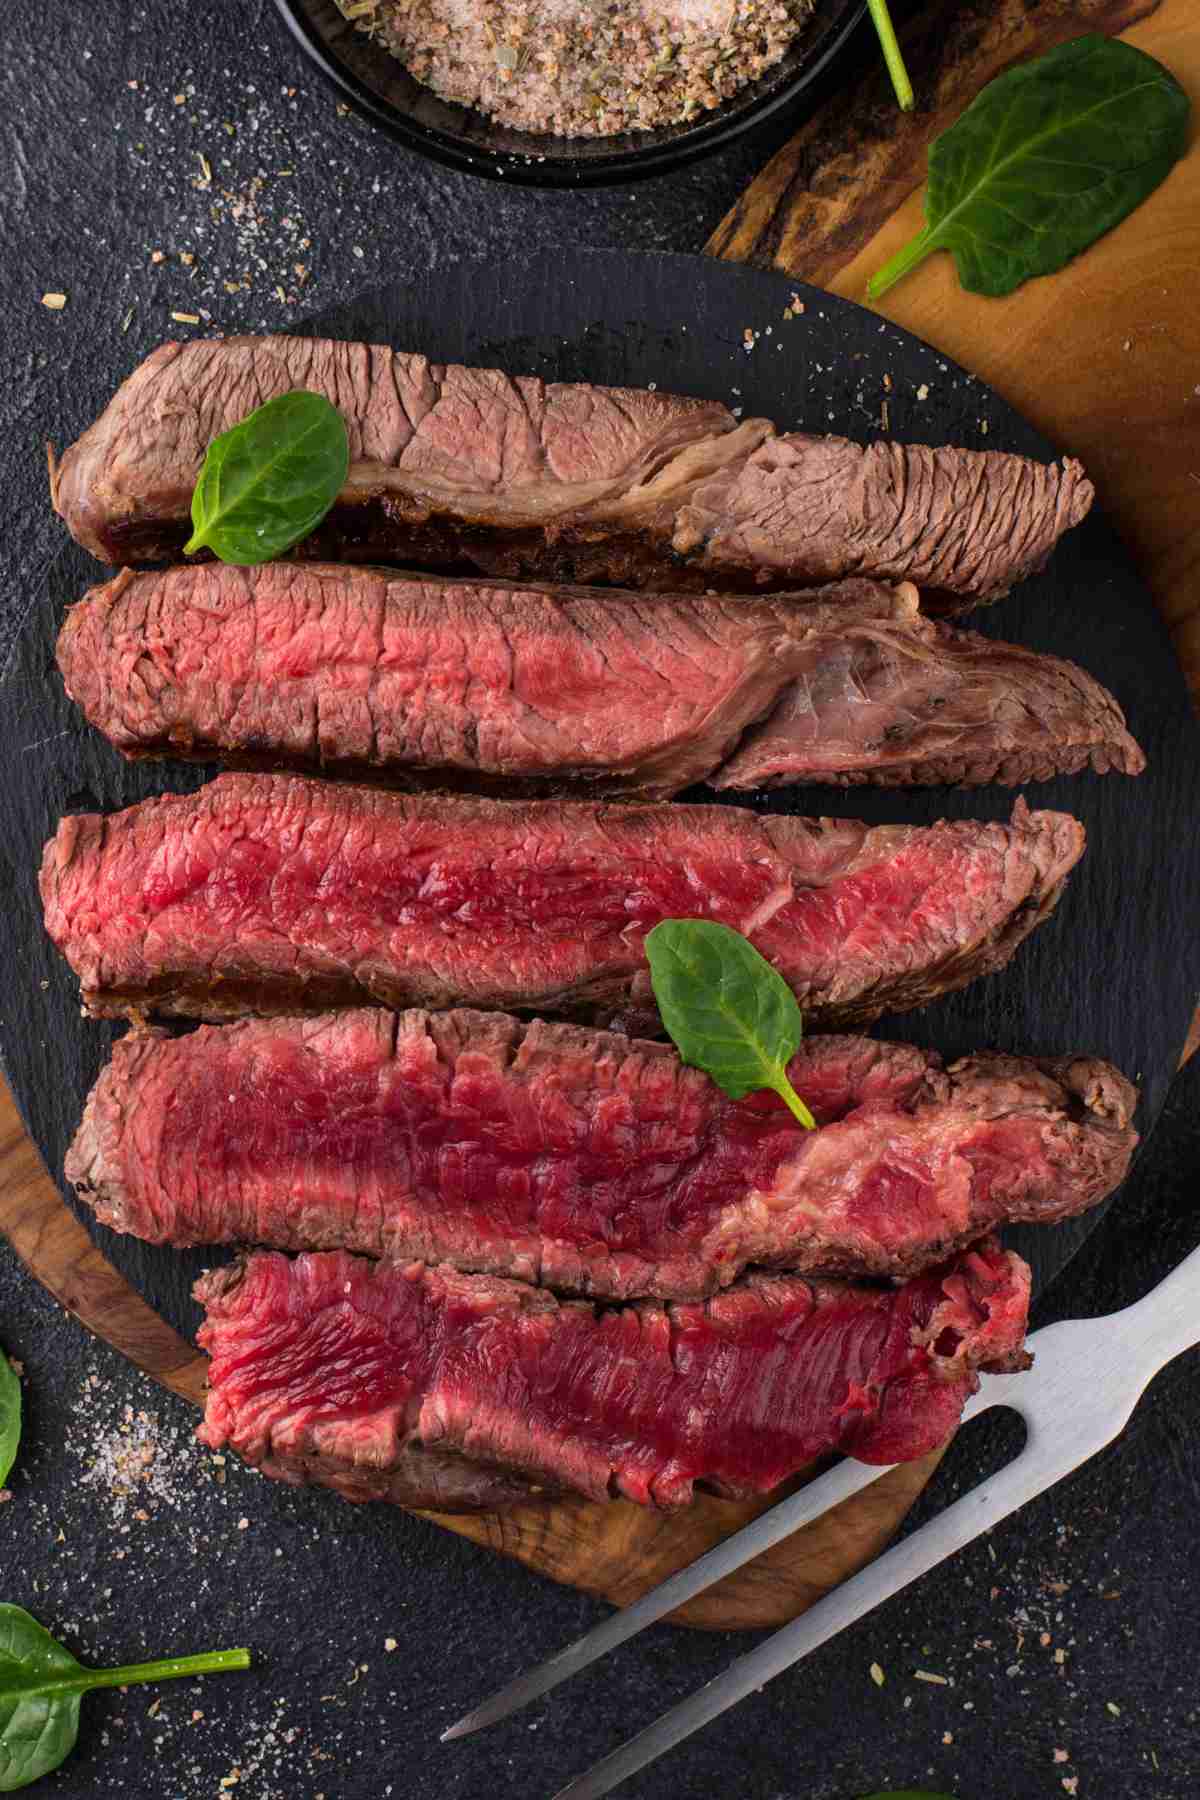 What’s the best internal temperature for steak? As there are 5 levels of doneness, you get to decide how you like your steak. From rare to well done, this post is a handy guide for preparing the perfect steak at home. Be sure to bookmark it for next time, too!